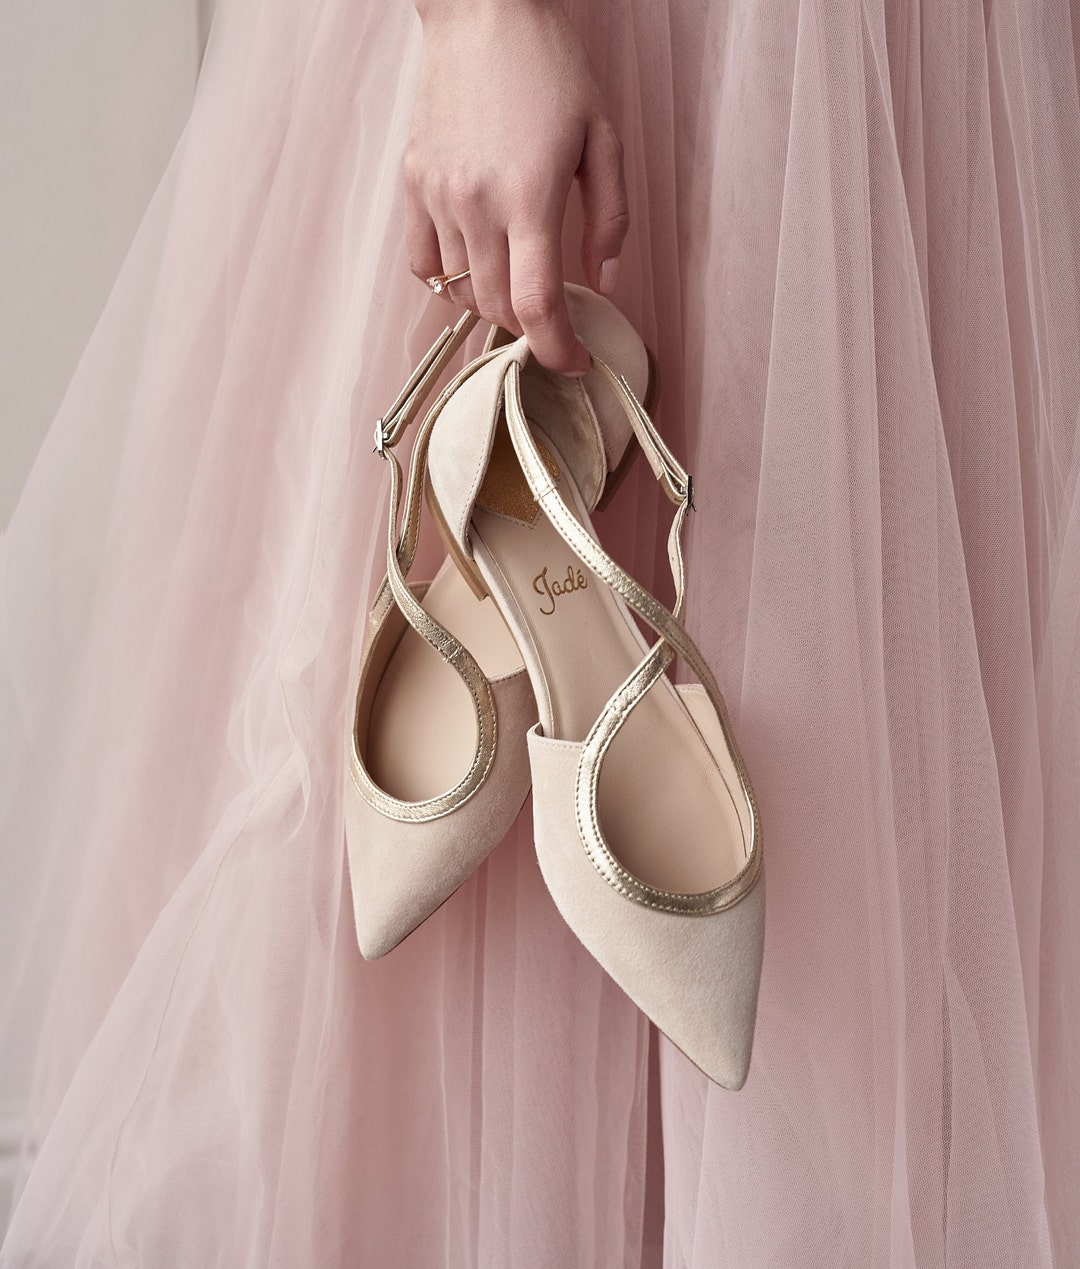 Pinky White Wedding Flats with Pointy Toe Wedding Flat Shoes Etsy 日本